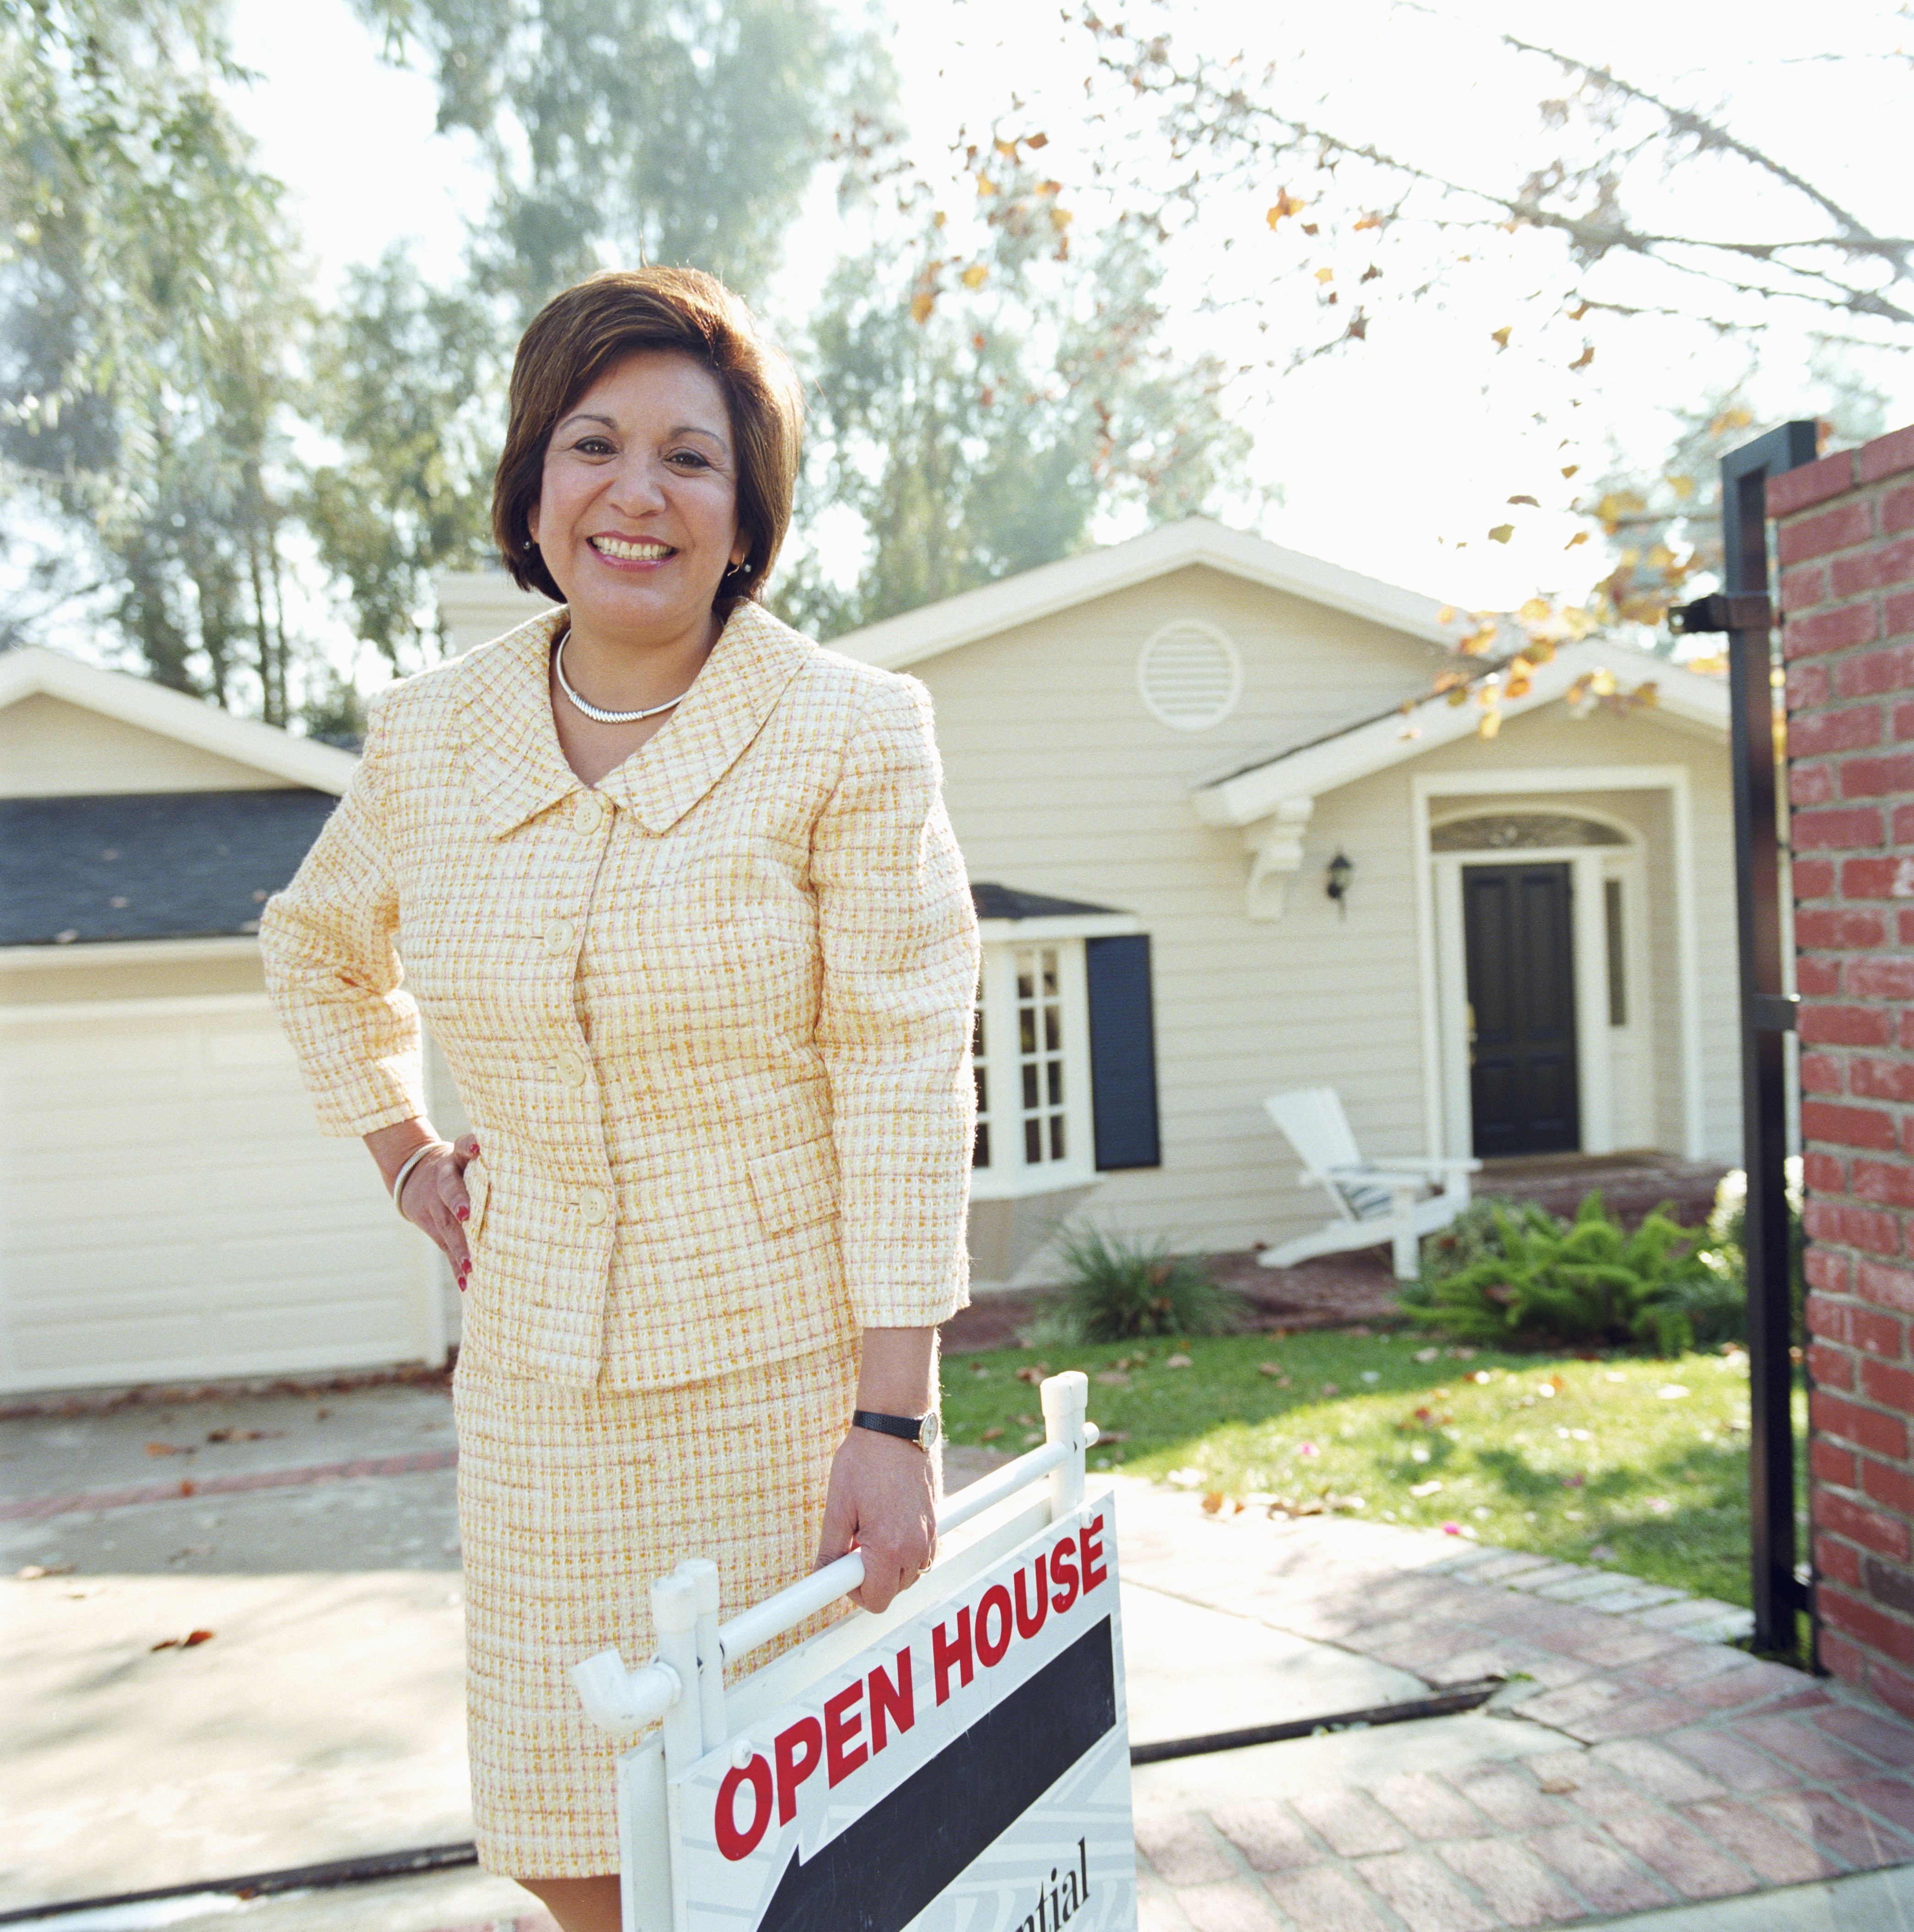 Questions to Ask a Realtor Before Selecting One